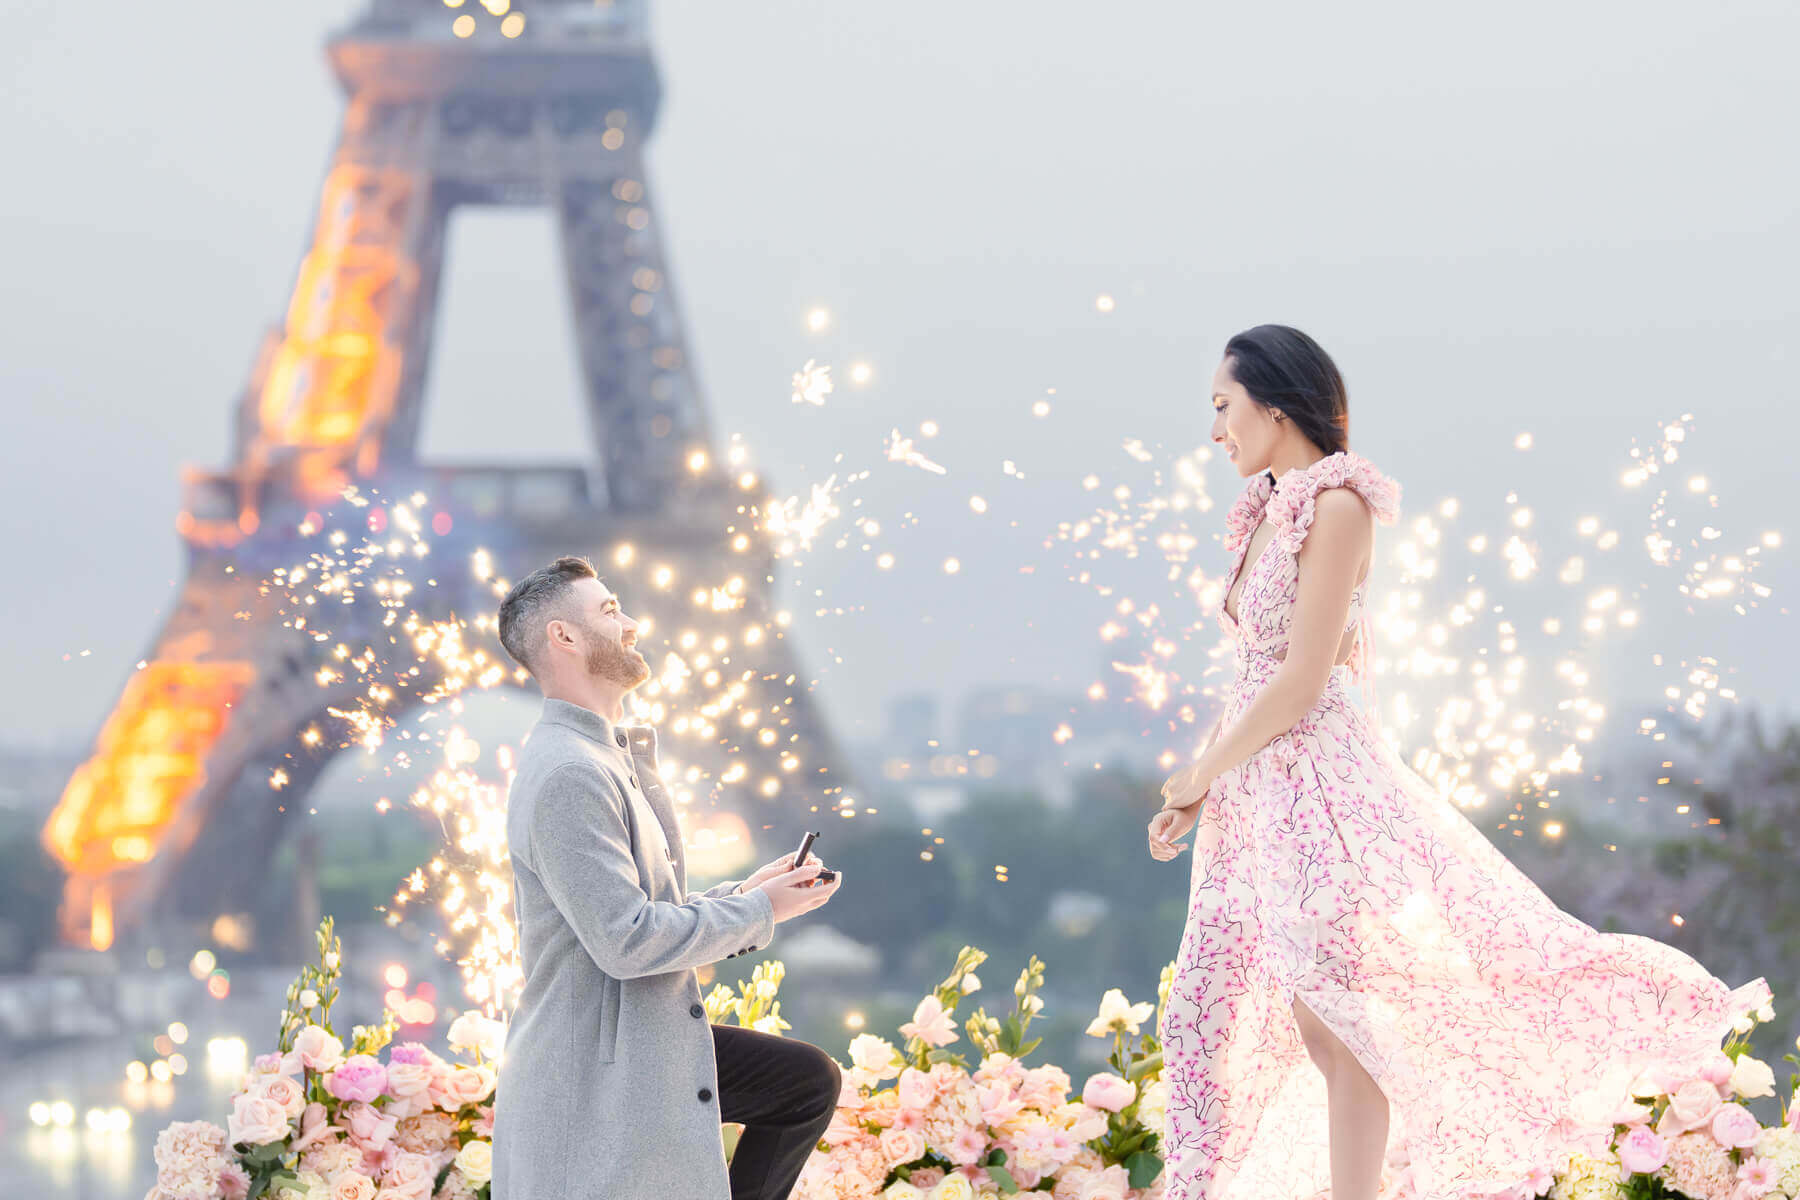 A breathtaking surprise marriage proposal in Paris, with the couple framed by fireworks fountains and the Eiffel Tower in the background, expertly planned by a premier Marriage Proposal planner.